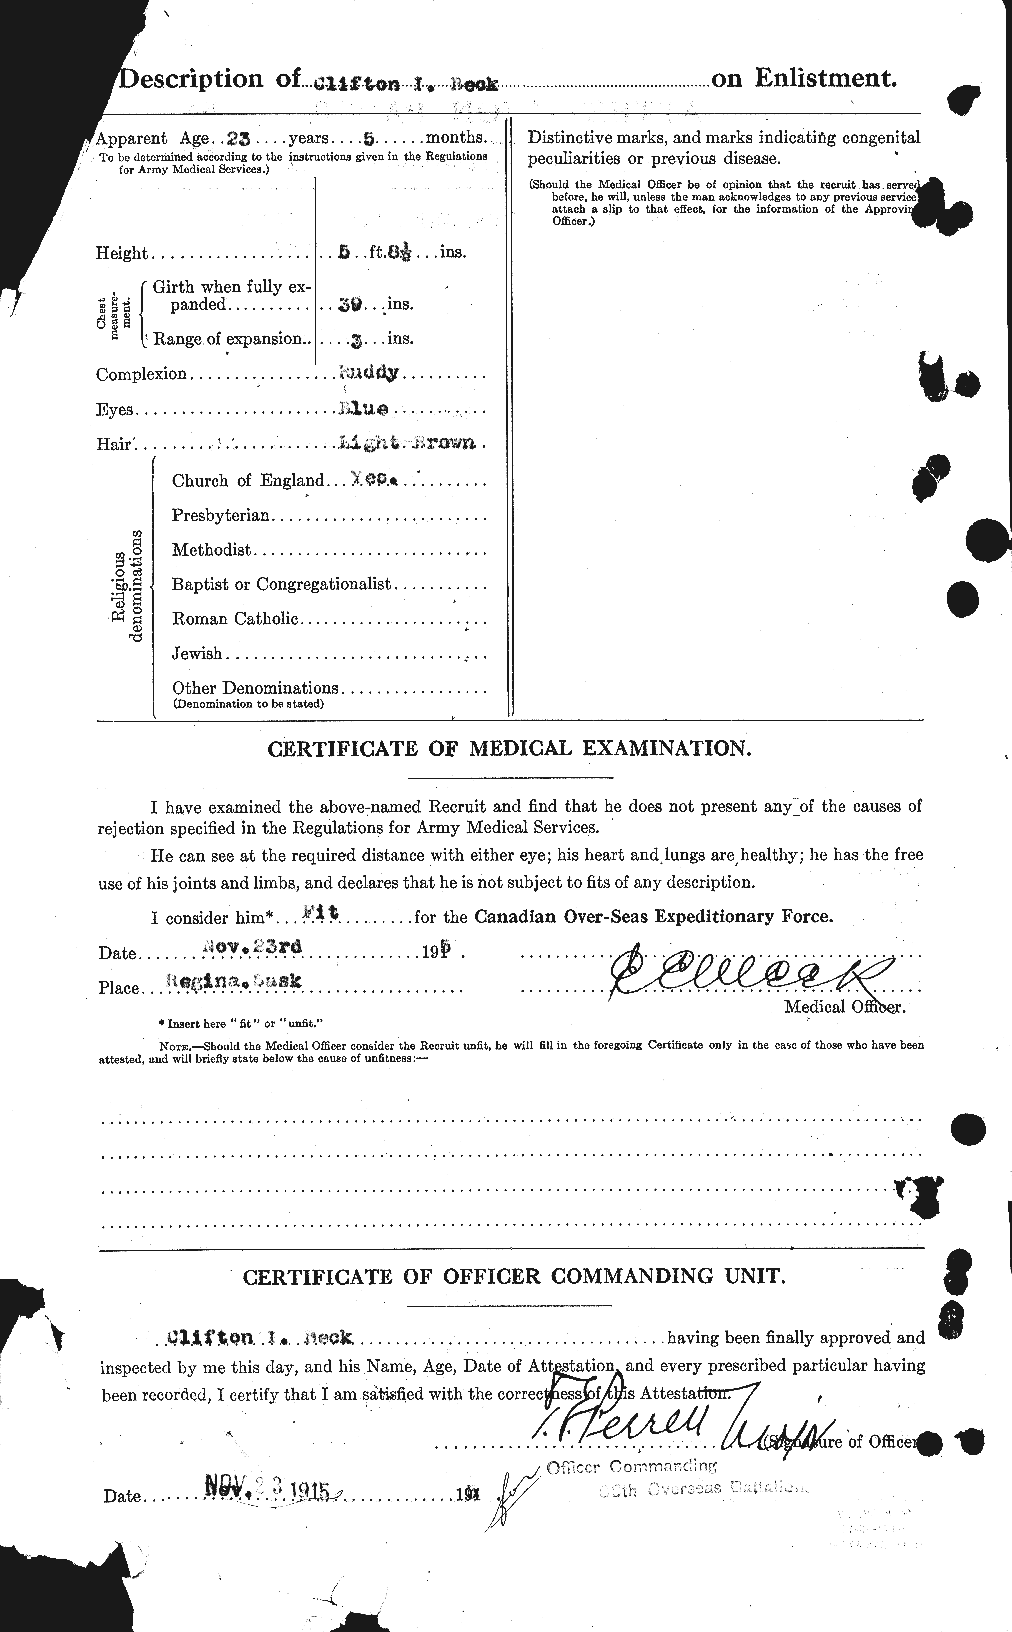 Personnel Records of the First World War - CEF 232100b